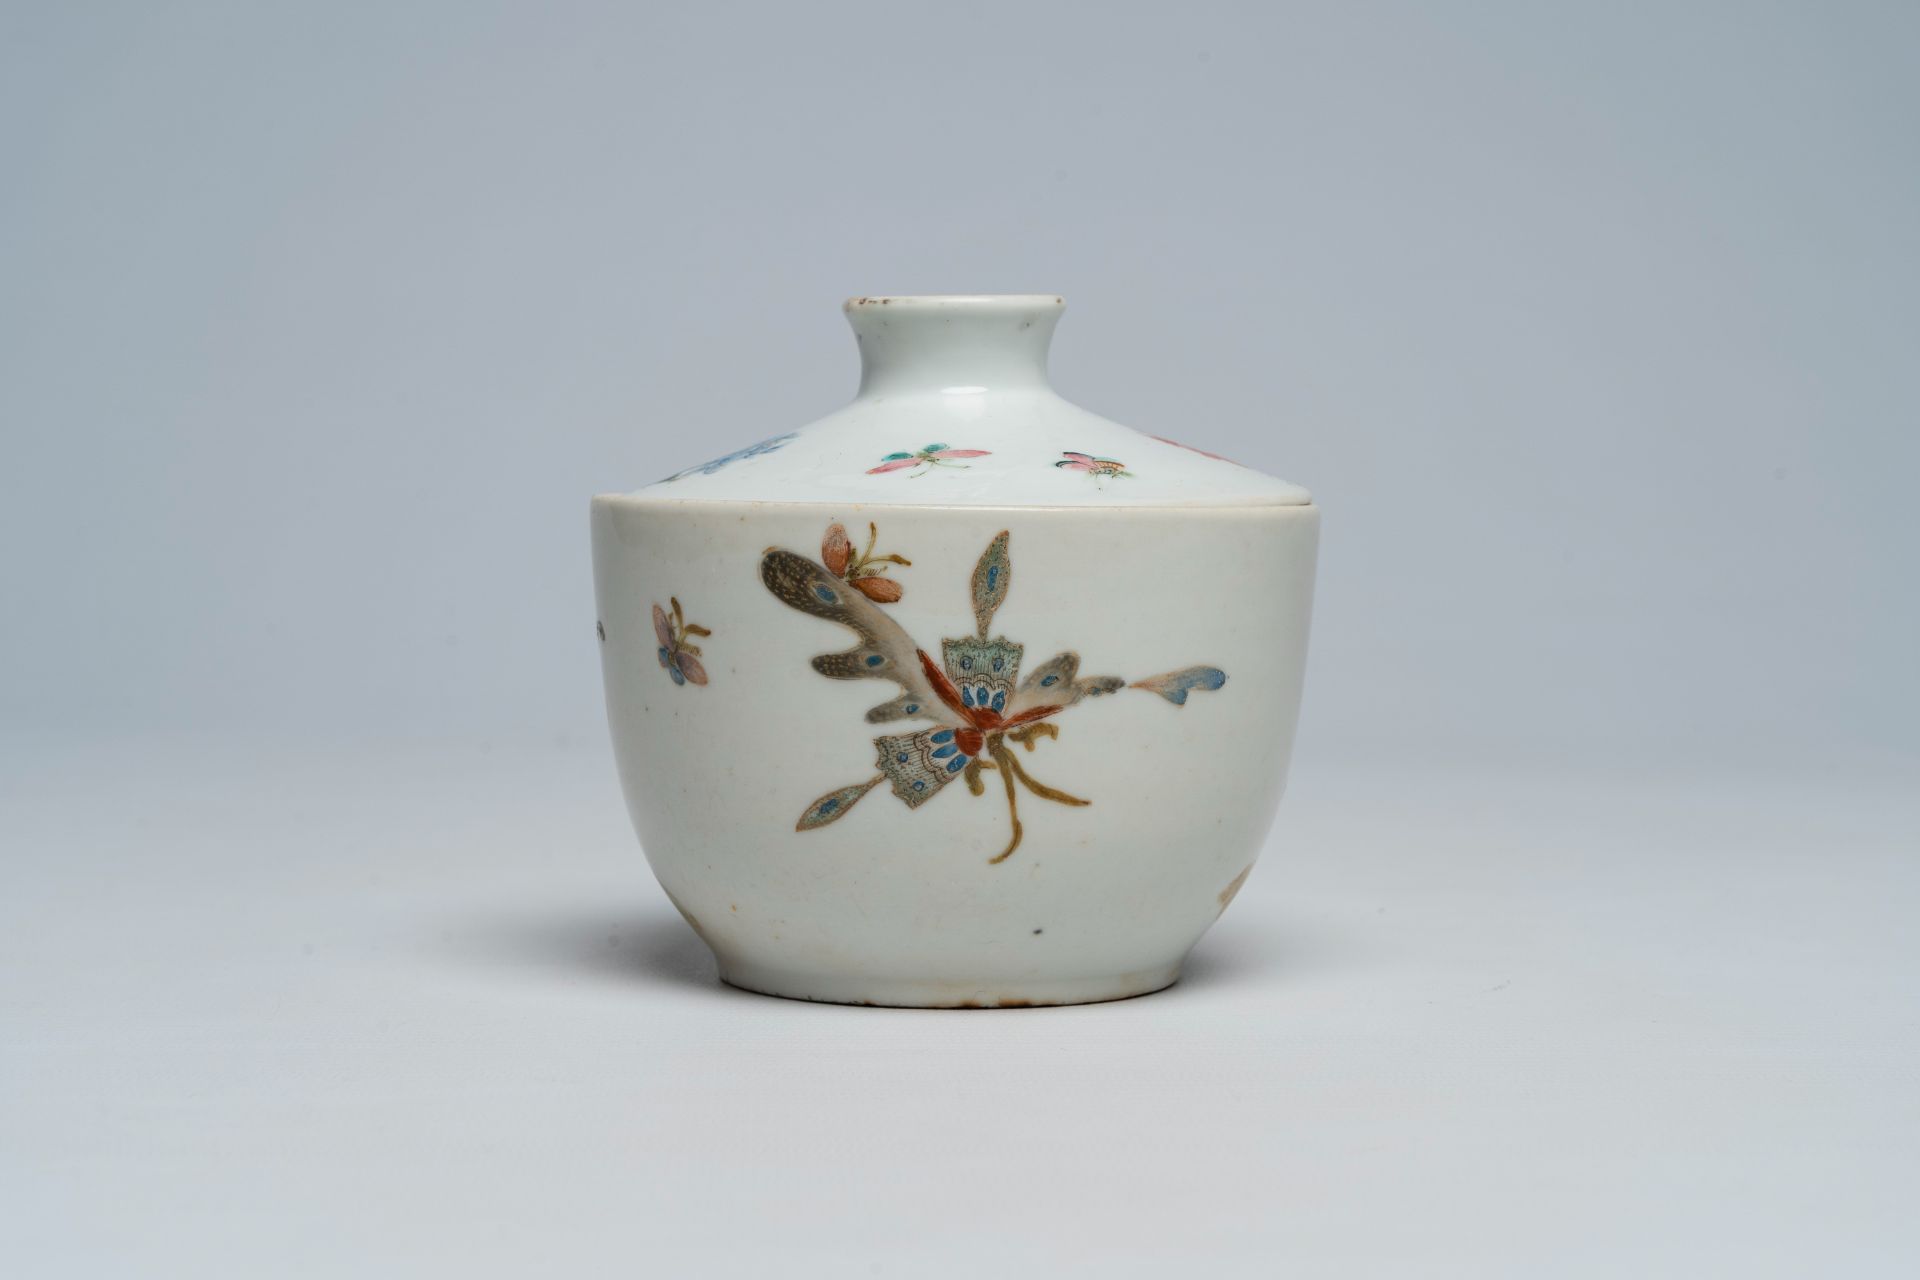 A Chinese famille rose bowl and cover with a phenix, butterflies and floral design, Tongzhi mark and - Image 2 of 5